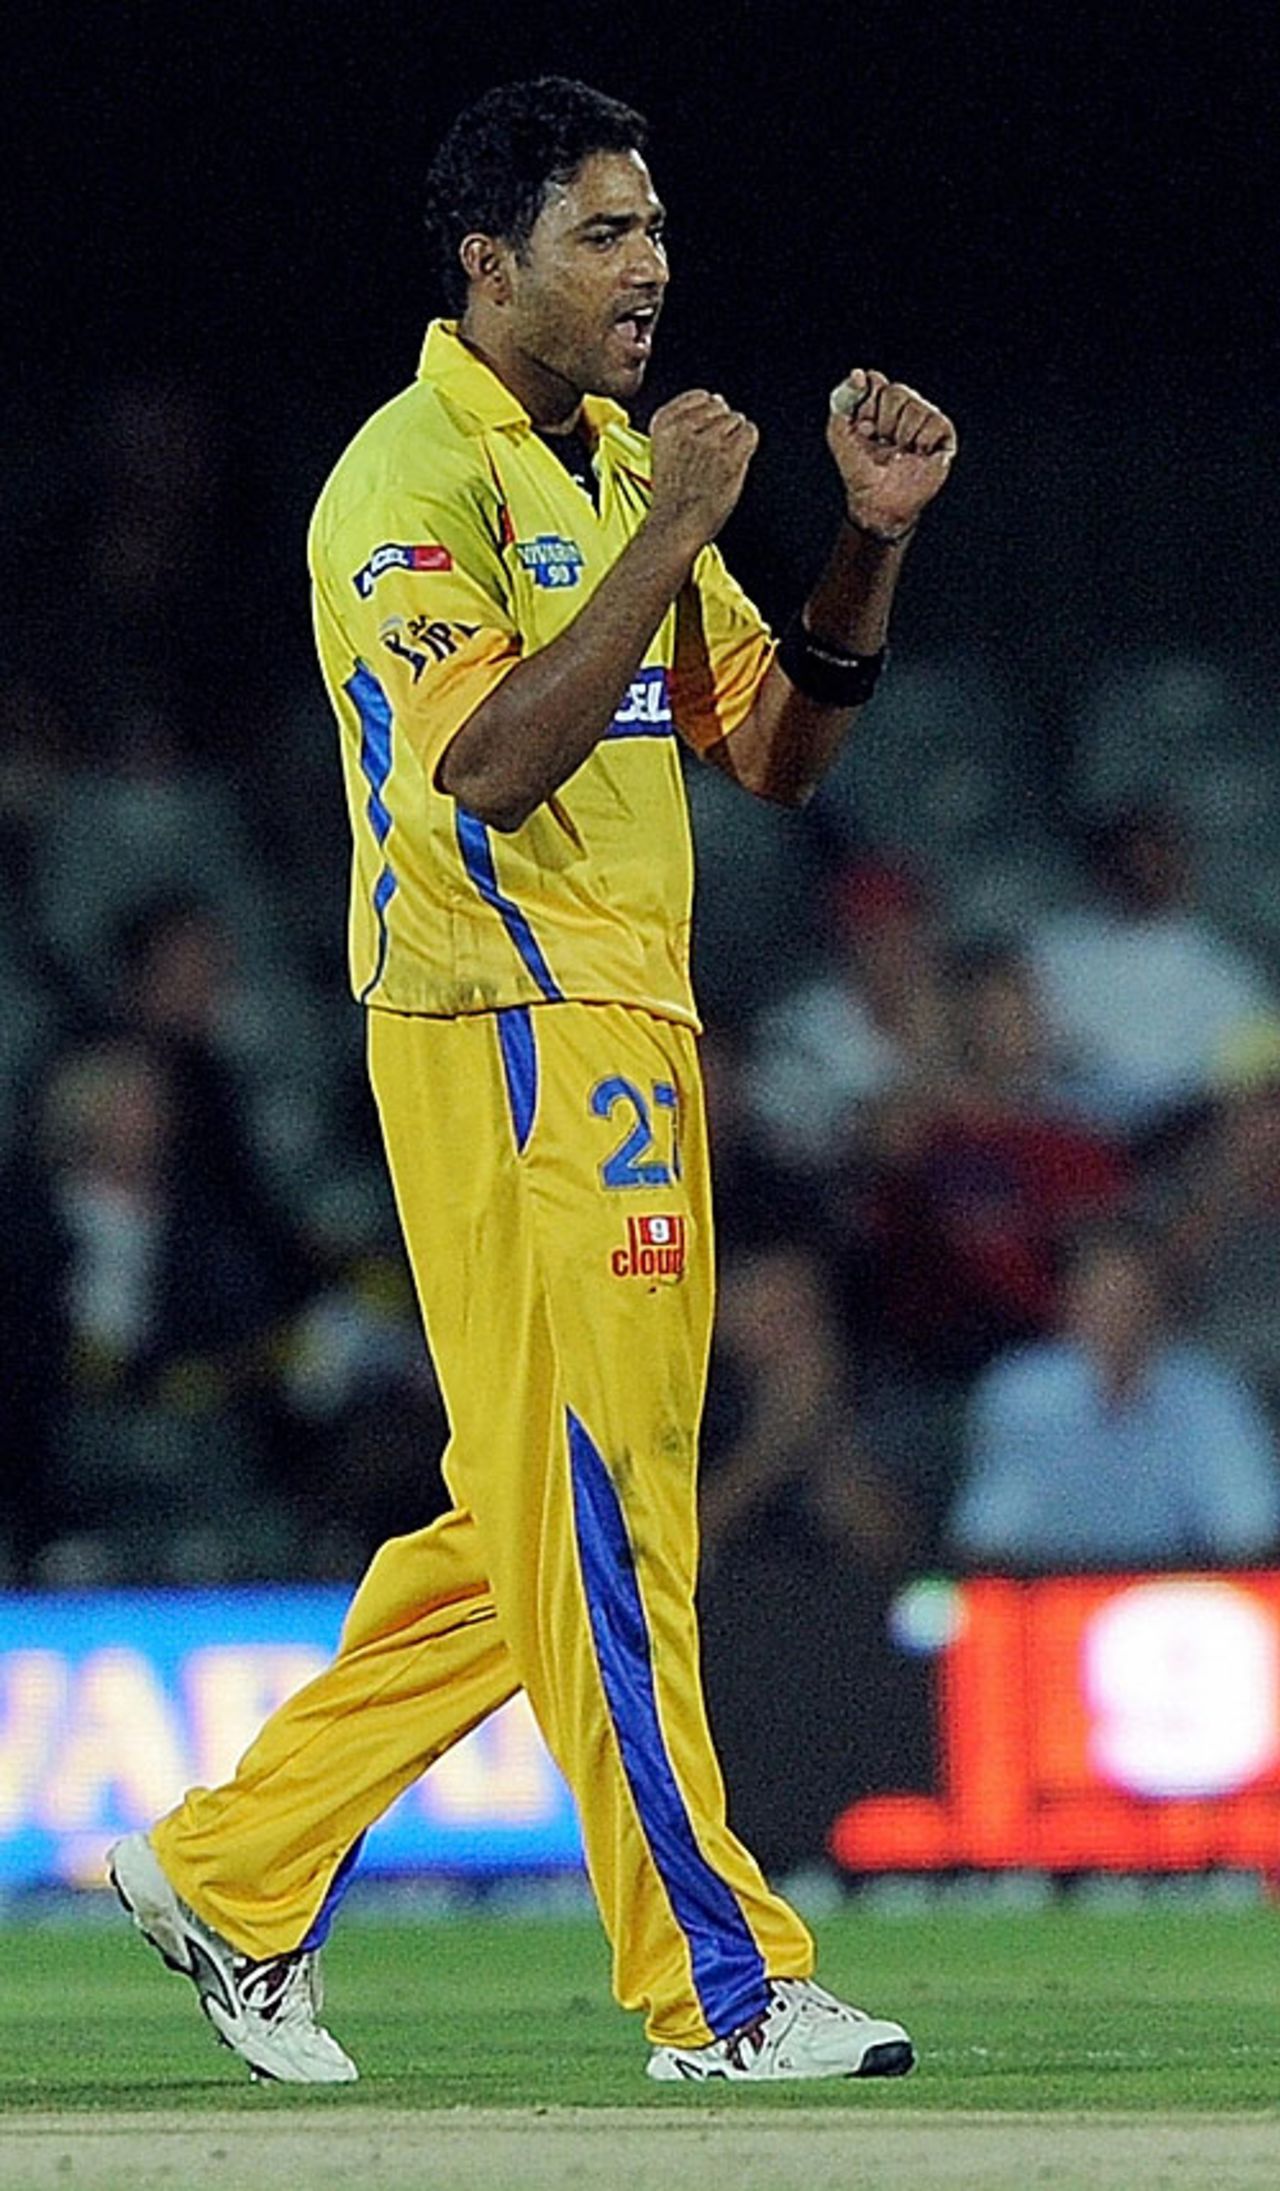 Shadab Jakati took his second consecutive four-wicket haul, Chennai Super Kings v Deccan Chargers, IPL, 29th match, East London, May 4, 2009